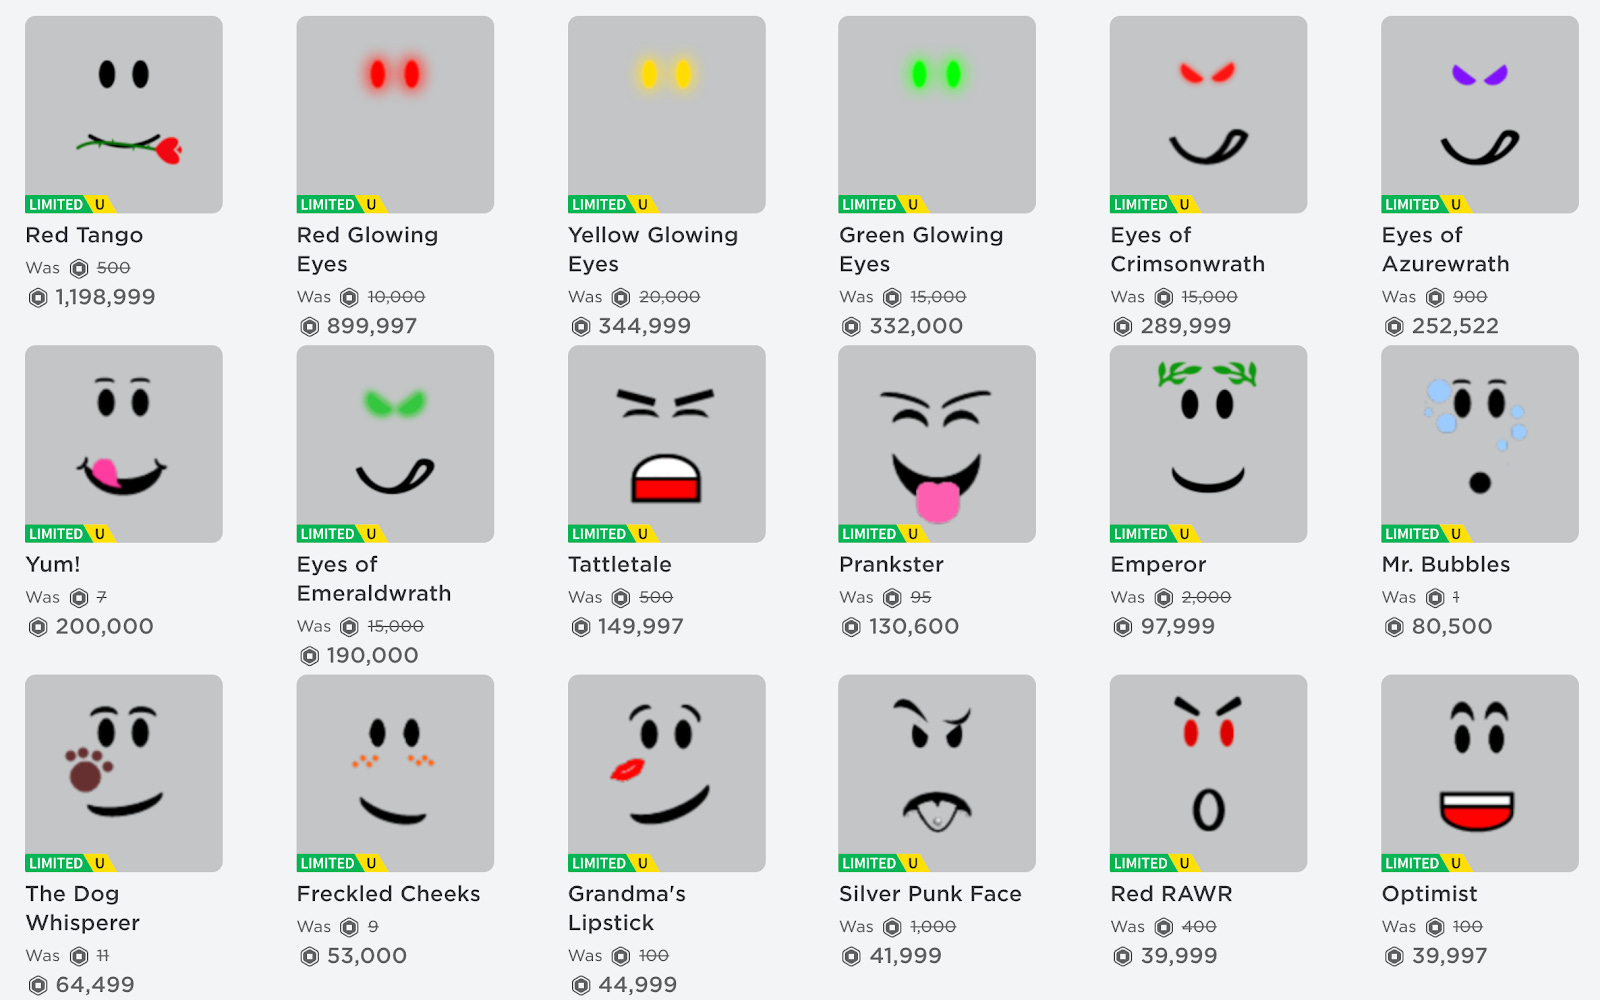 Best Roblox Faces - Which Roblox Face Are You?